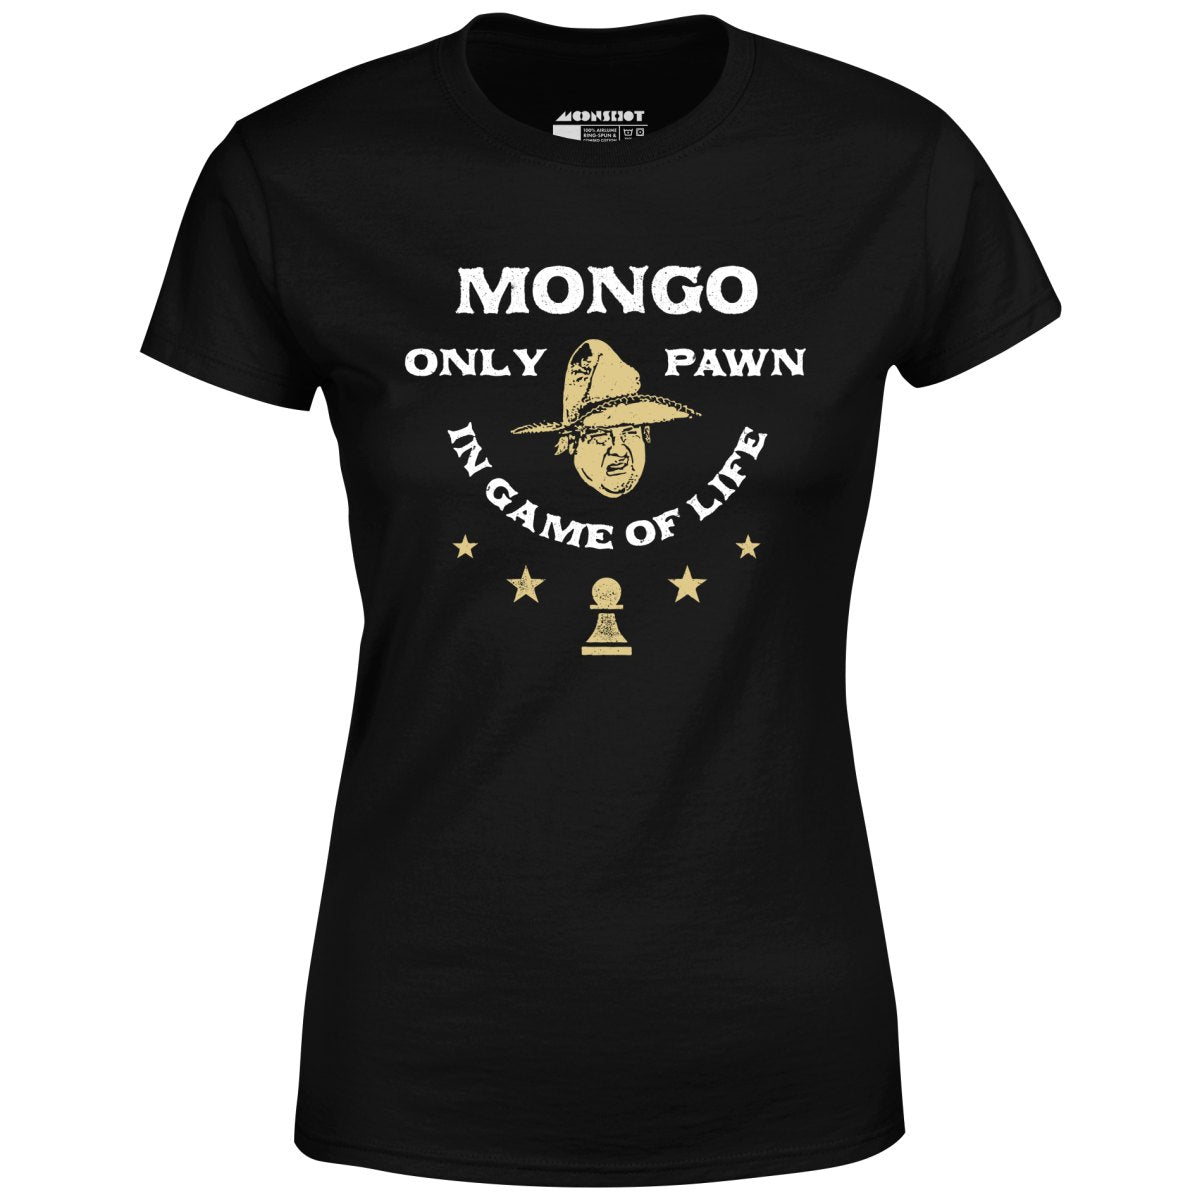 Mongo Only Pawn in Game of Life - Women's T-Shirt